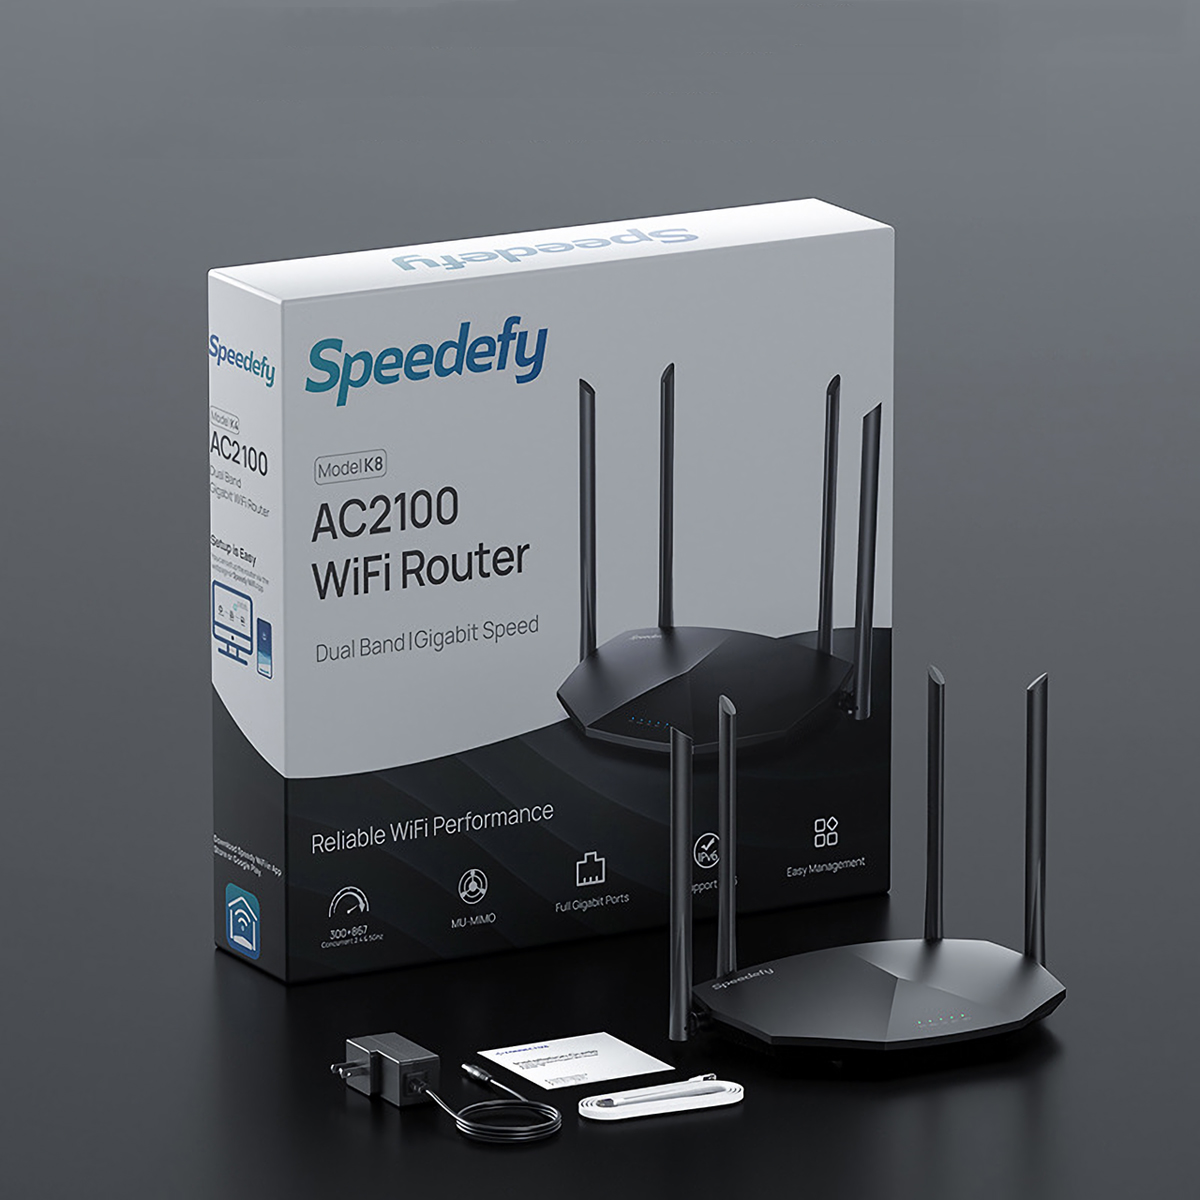 Speedefy-AC2100-Dual-Band-High-Speed-Wireless-WiFi-Router-24GHz5GHz-Up-to-35-Devices-2000-sqft-Cover-1940494-11